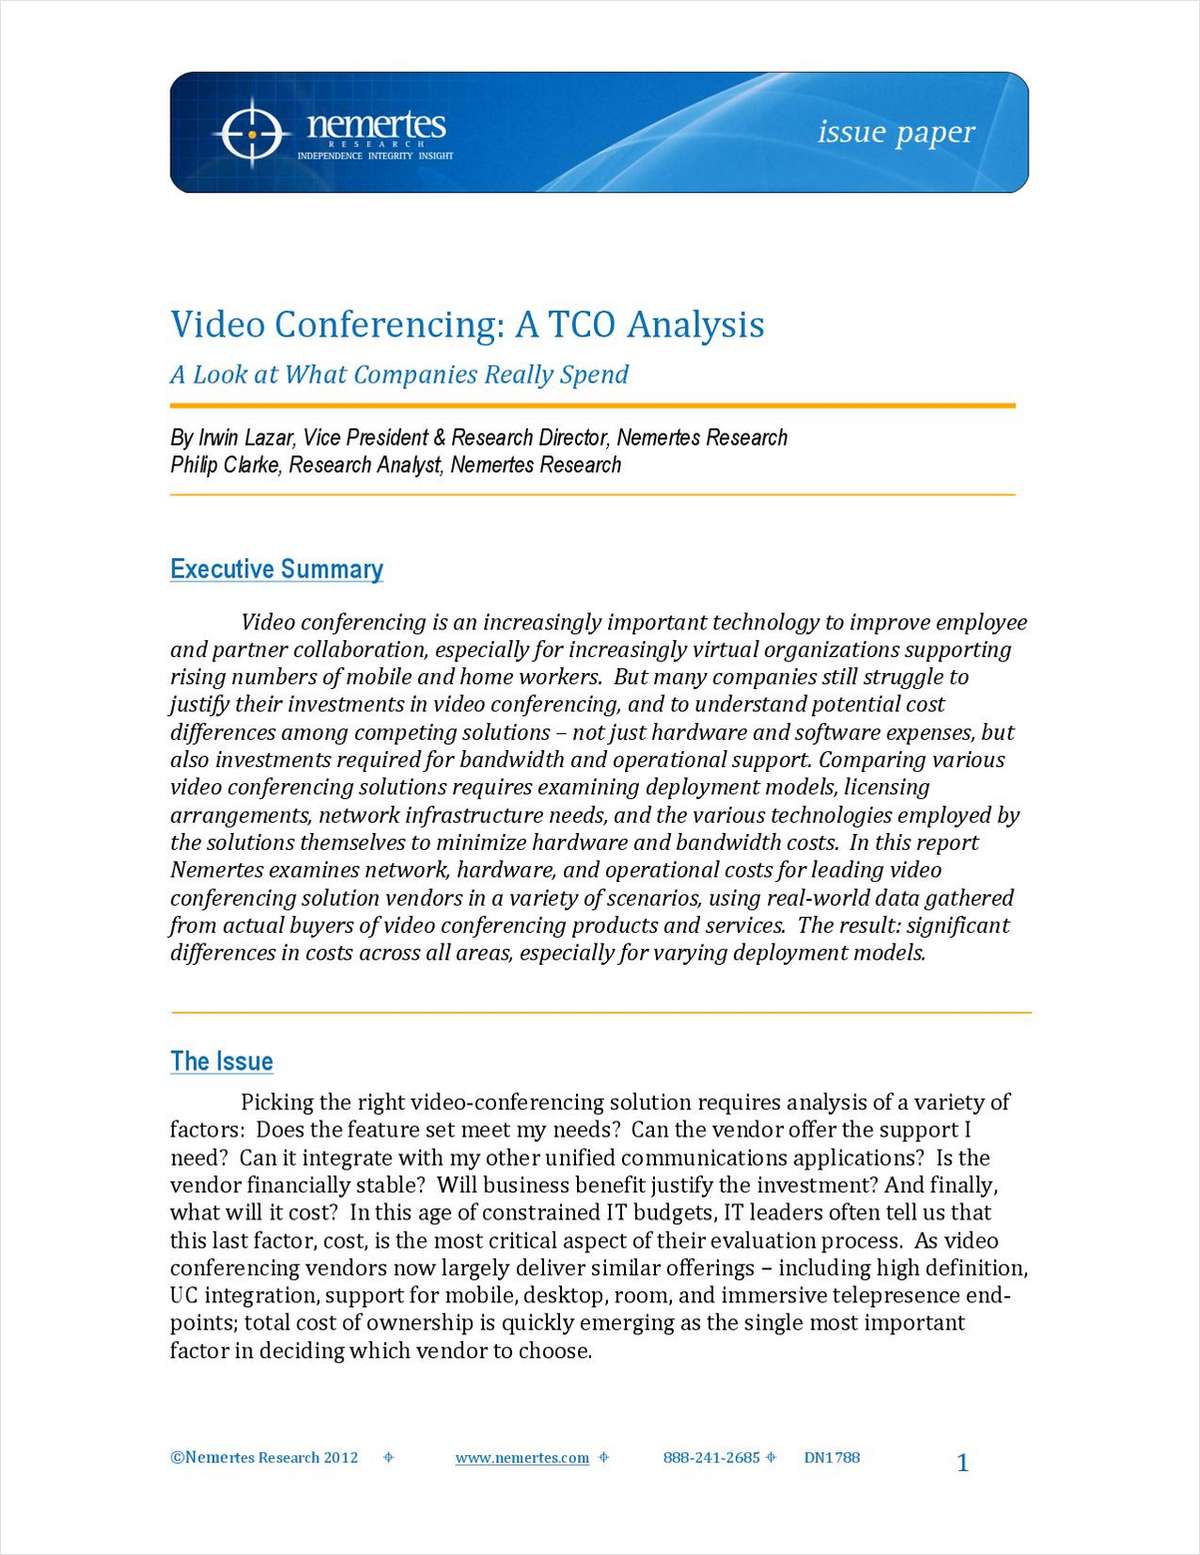 Video Conferencing, A TCO Analysis: A Look at What Companies Really Spend